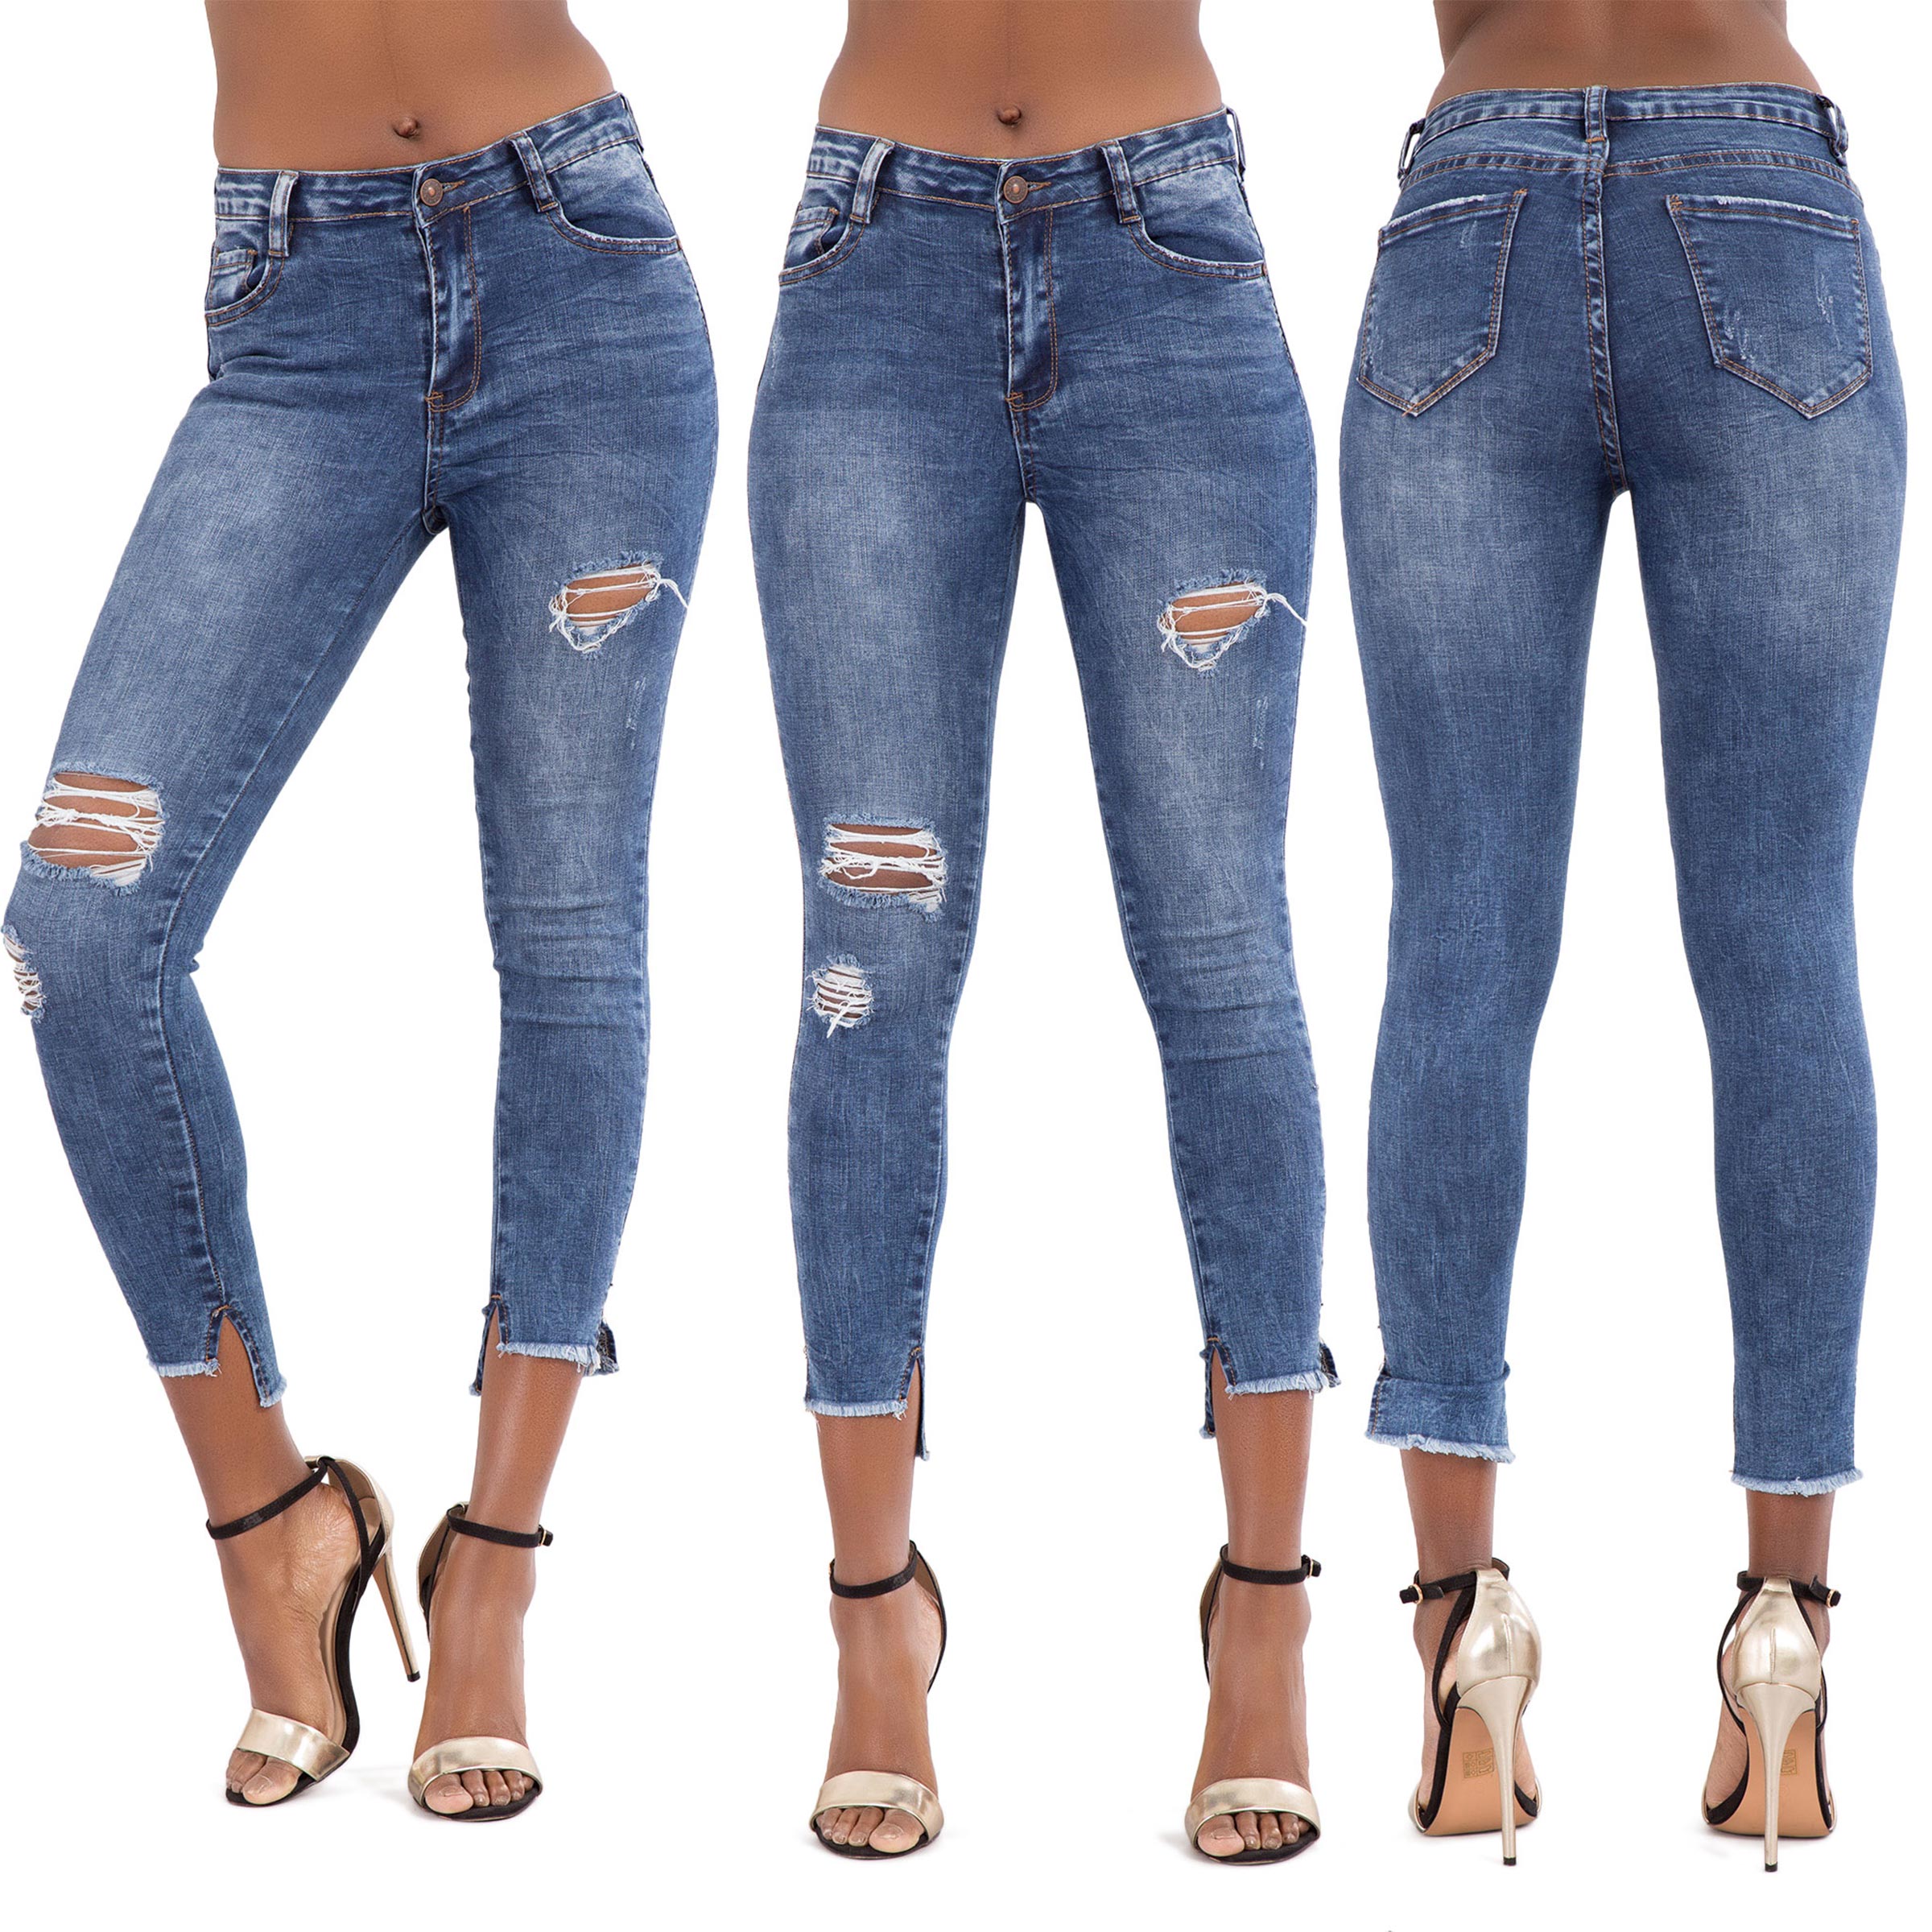 NEW WOMENS LADIES SKINNY FIT RIPPED JEANS FADED STRETCHY DENIM SIZE 6 ...